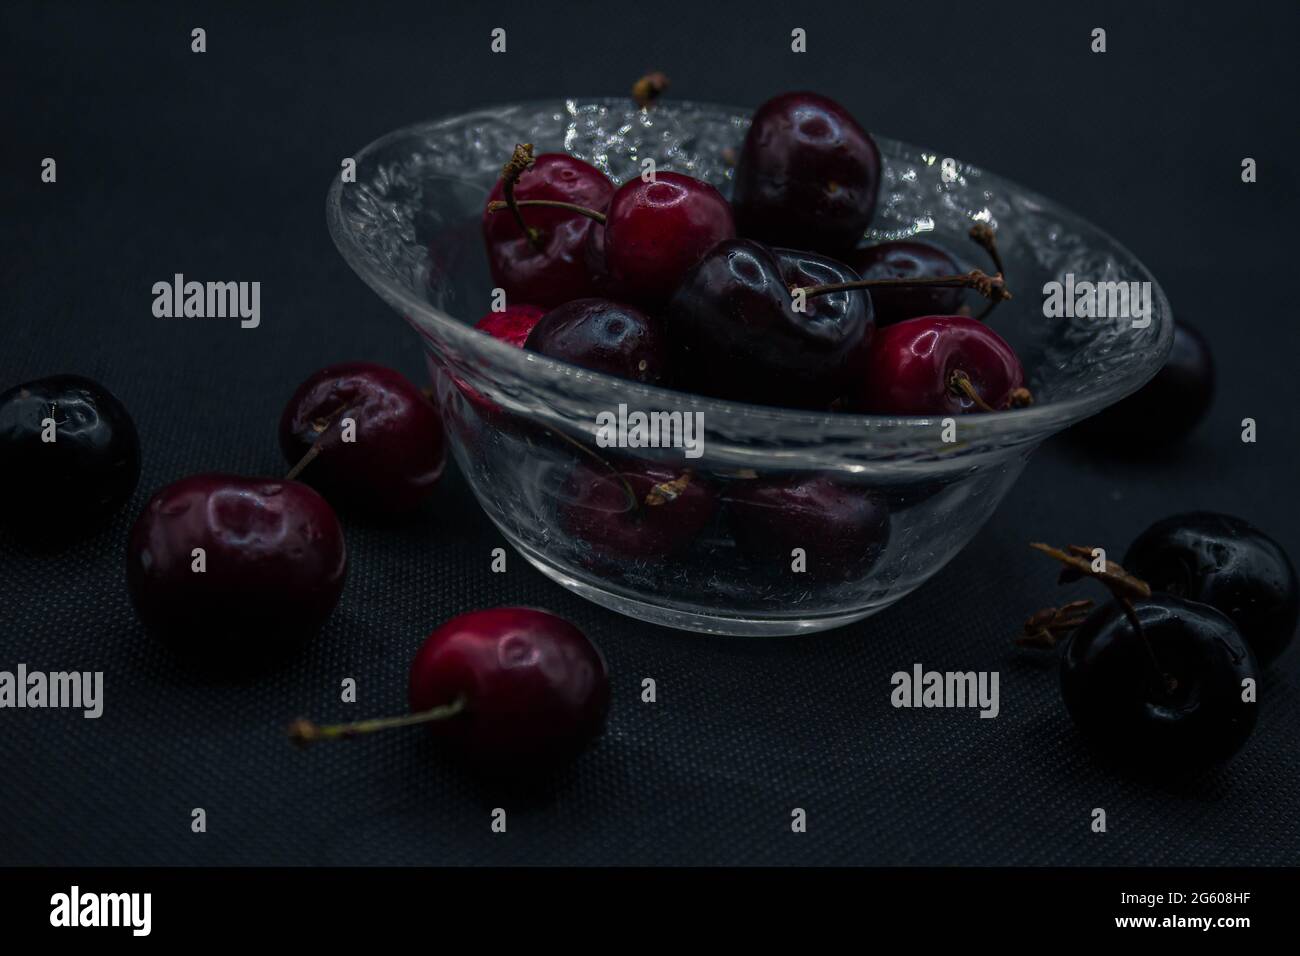 Cherries with water drops isolated in black backround. Ripe cherries. Sweet red cherry. top view. Rustic style. fruit wallpaper Stock Photo